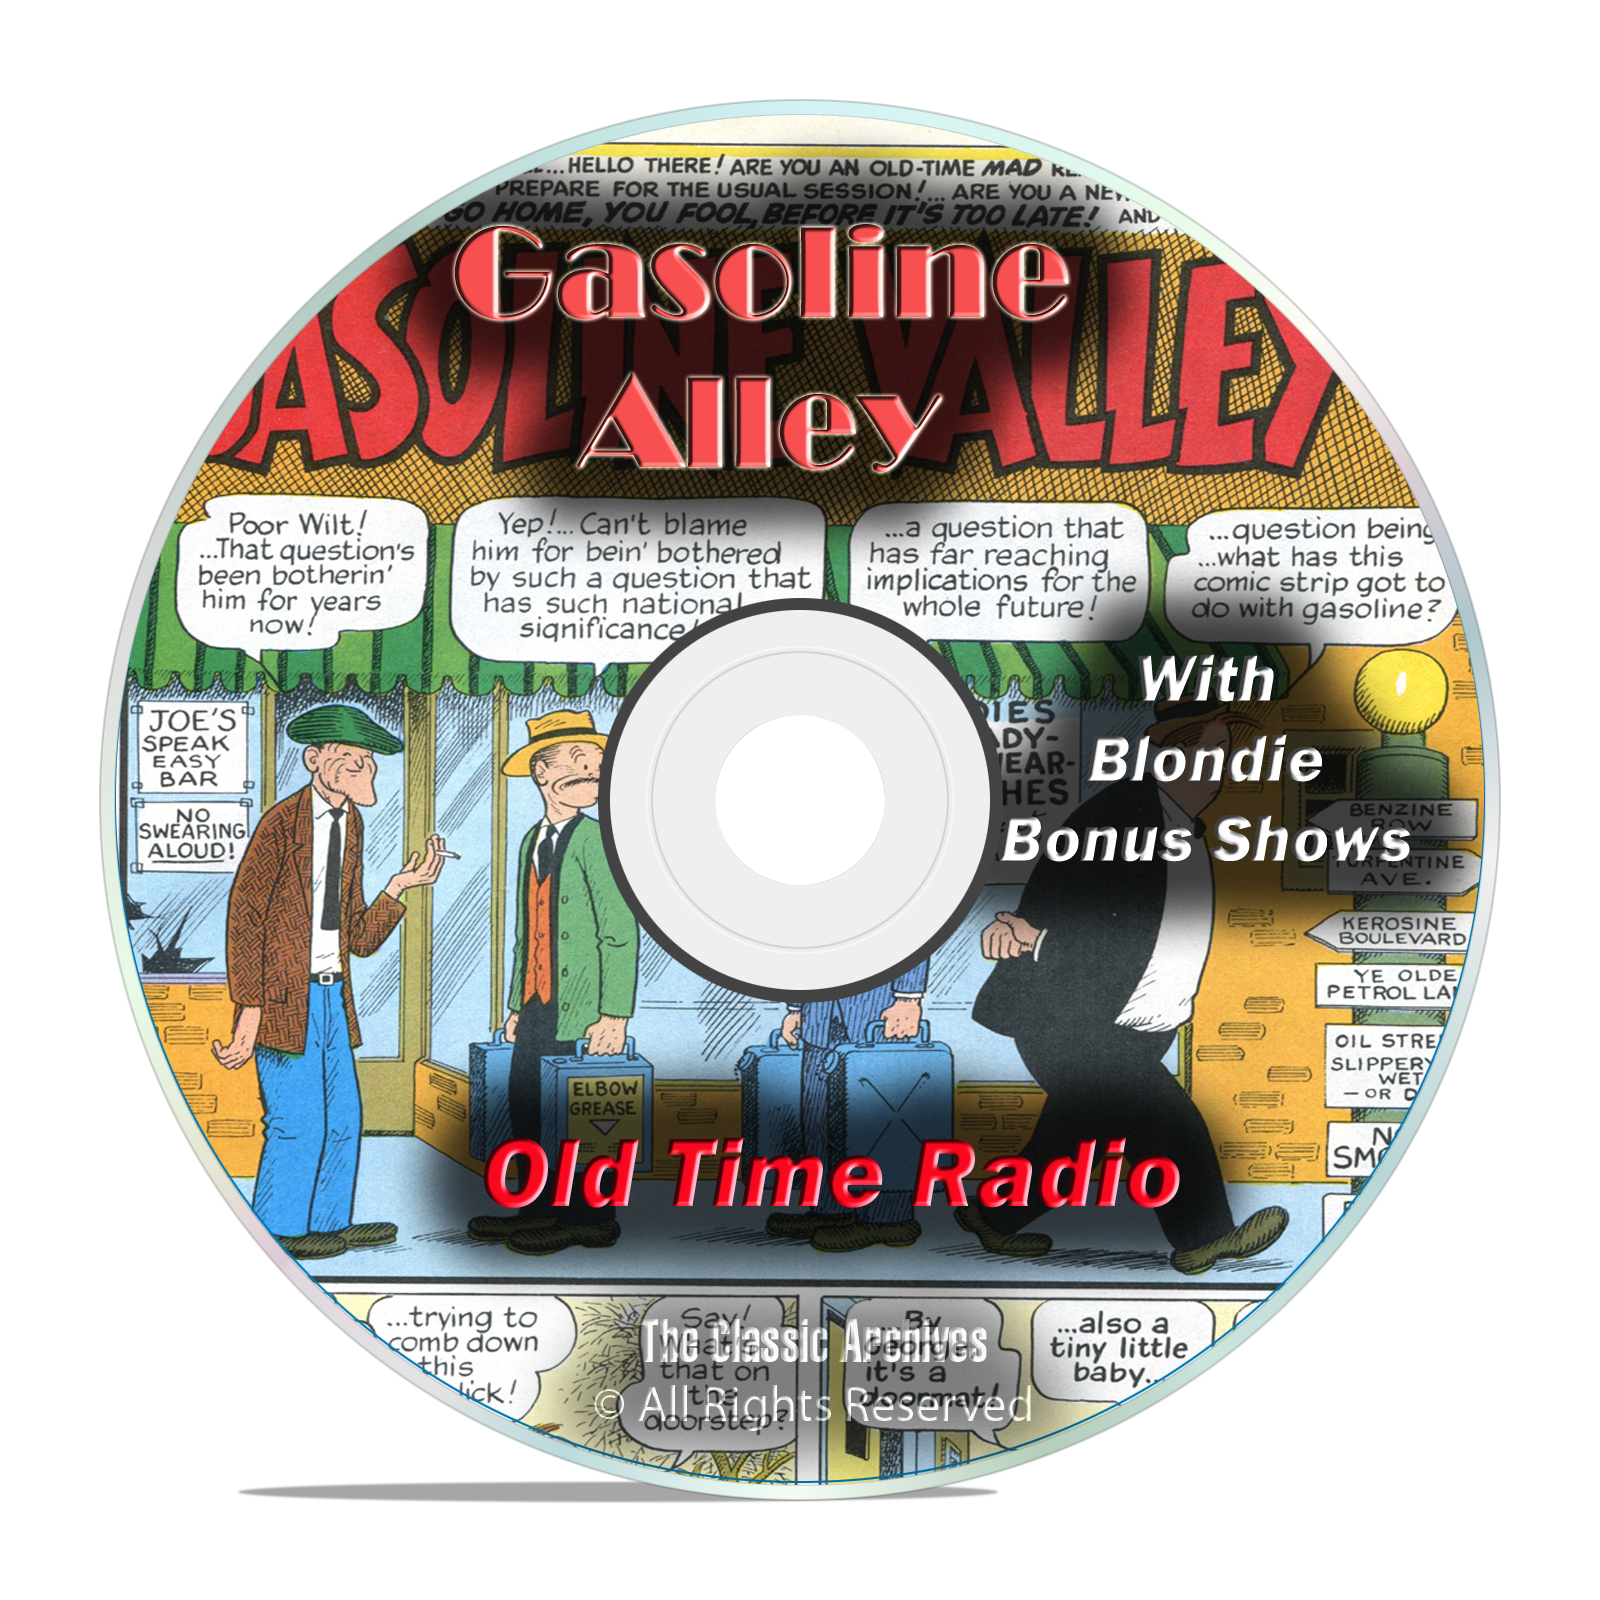 Gasoline Alley, and Blondie, 931 Old Time Radio Shows, Comedy Shows OTR